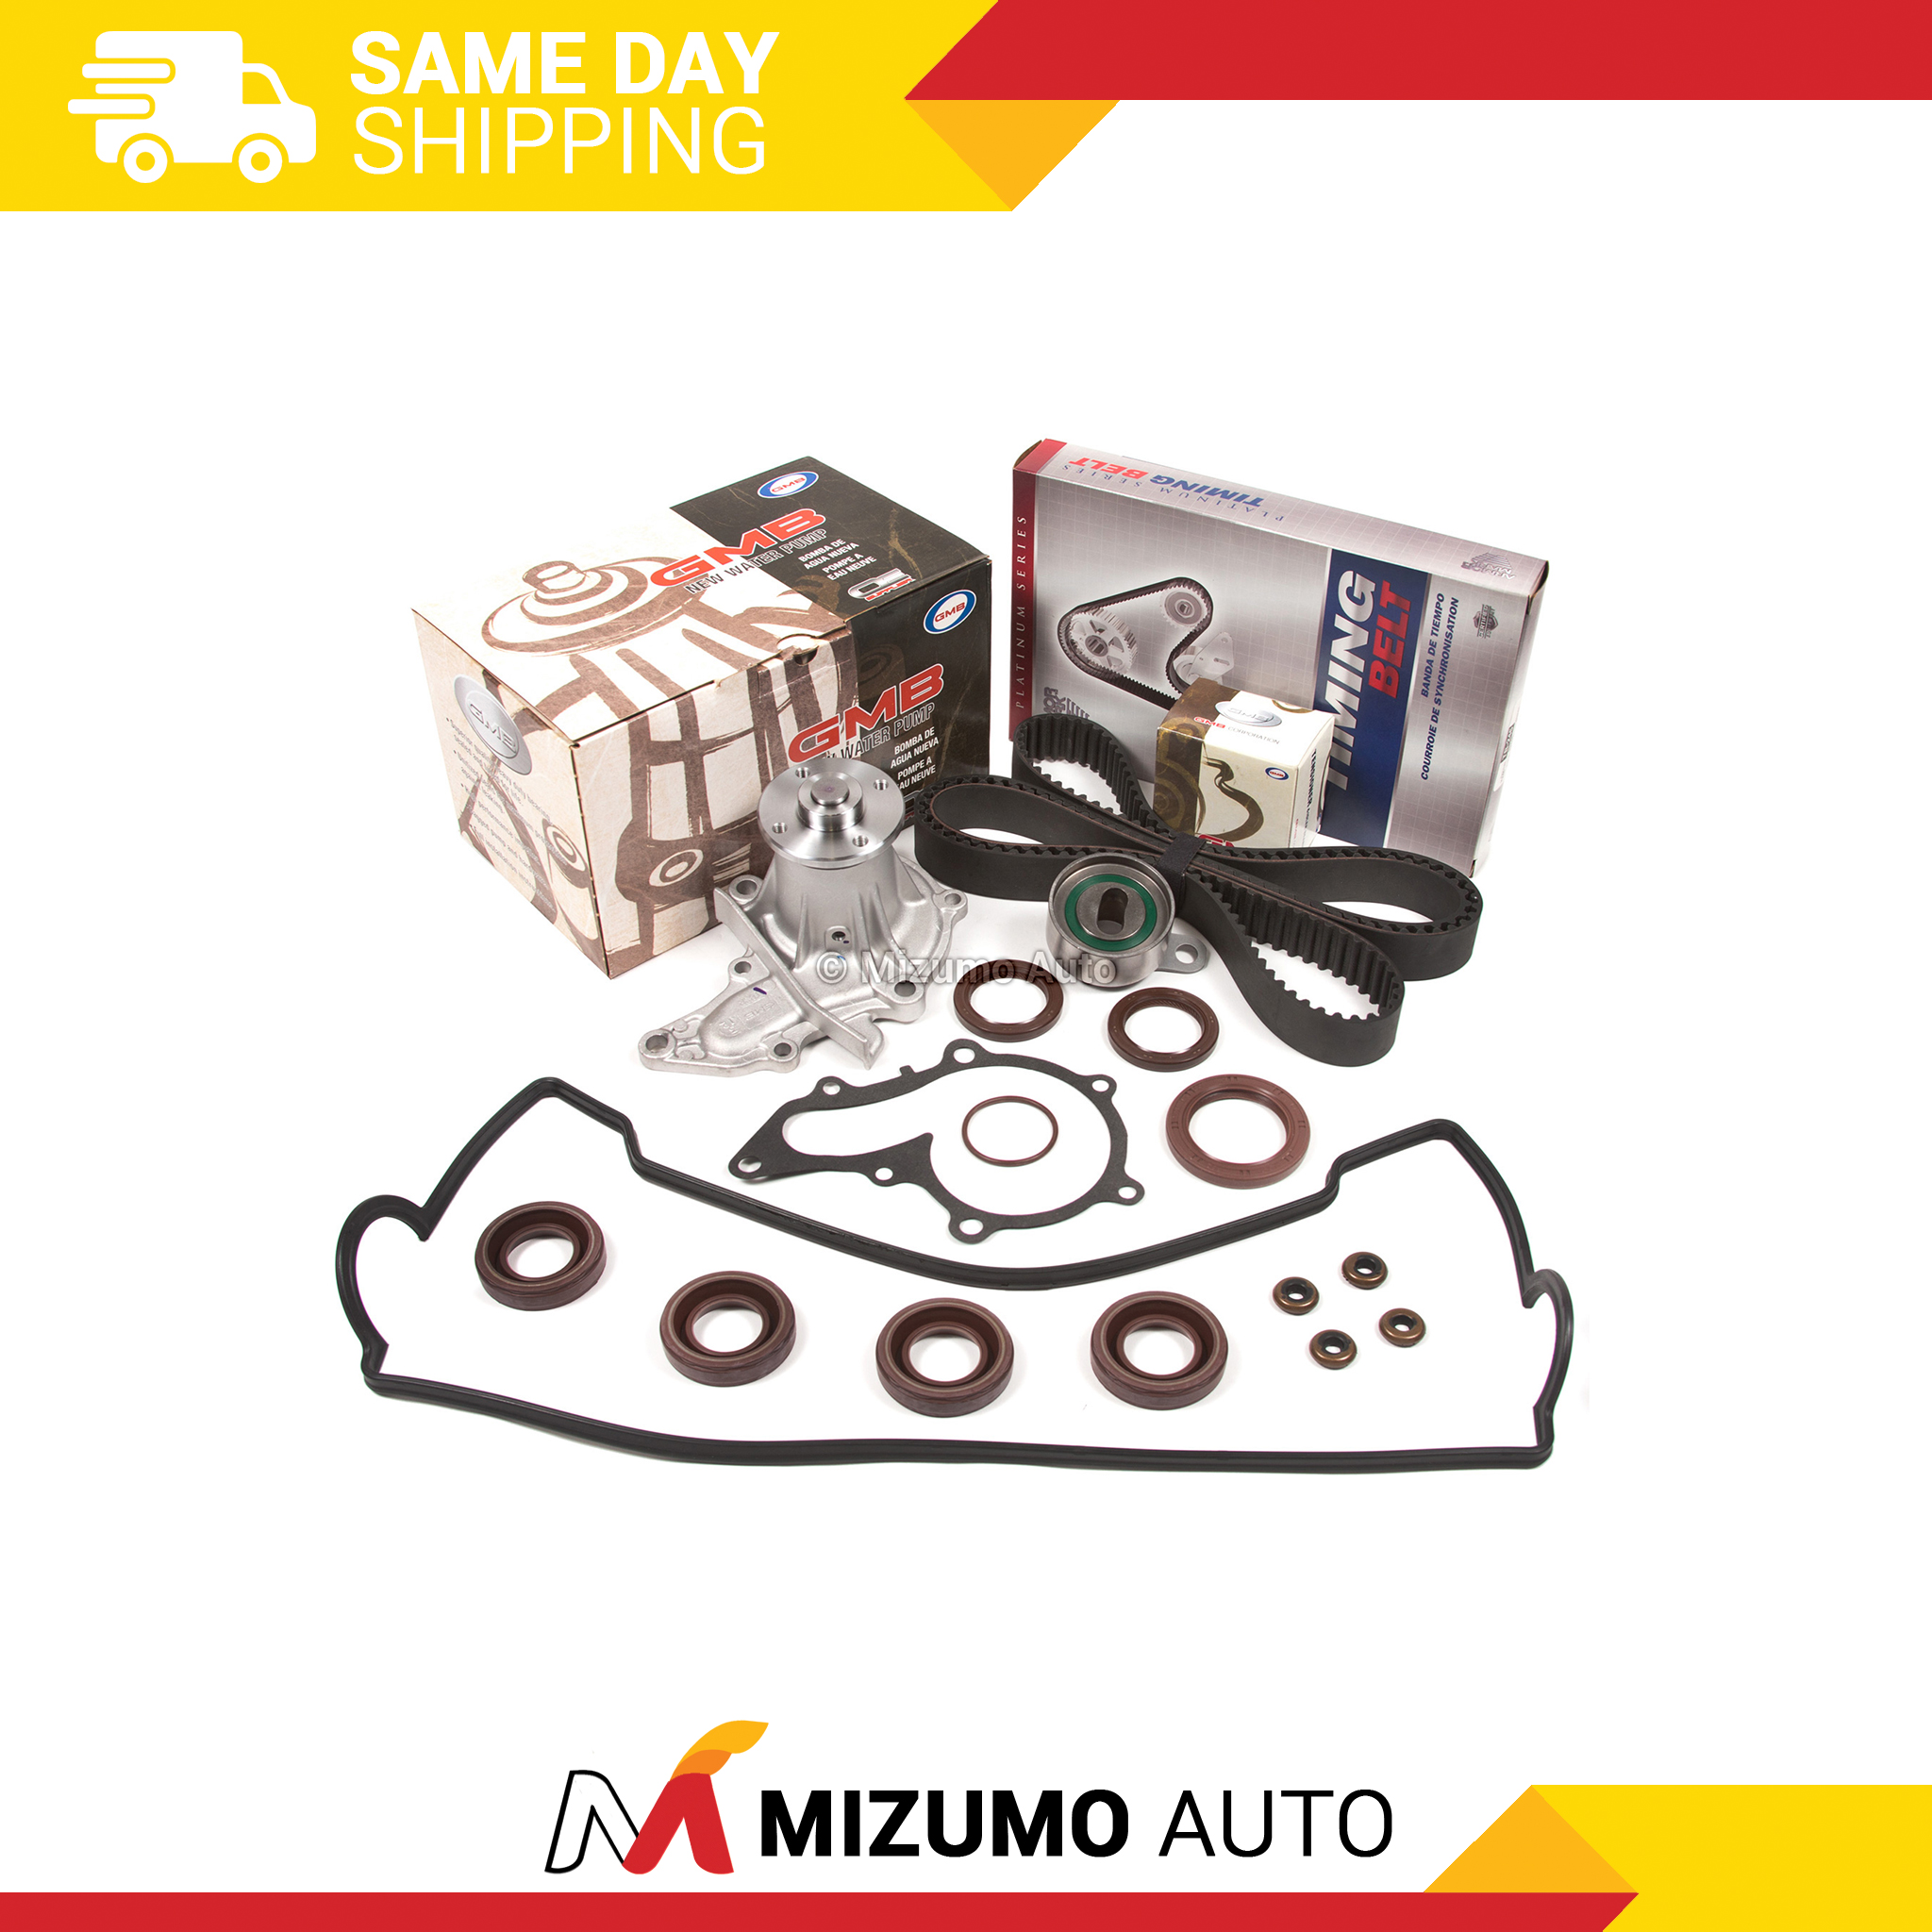 Details about   Timing Belt Kit Water Pump Valve Cover Fit 93-97 Toyota Corolla Geo Prizm 4AFE 